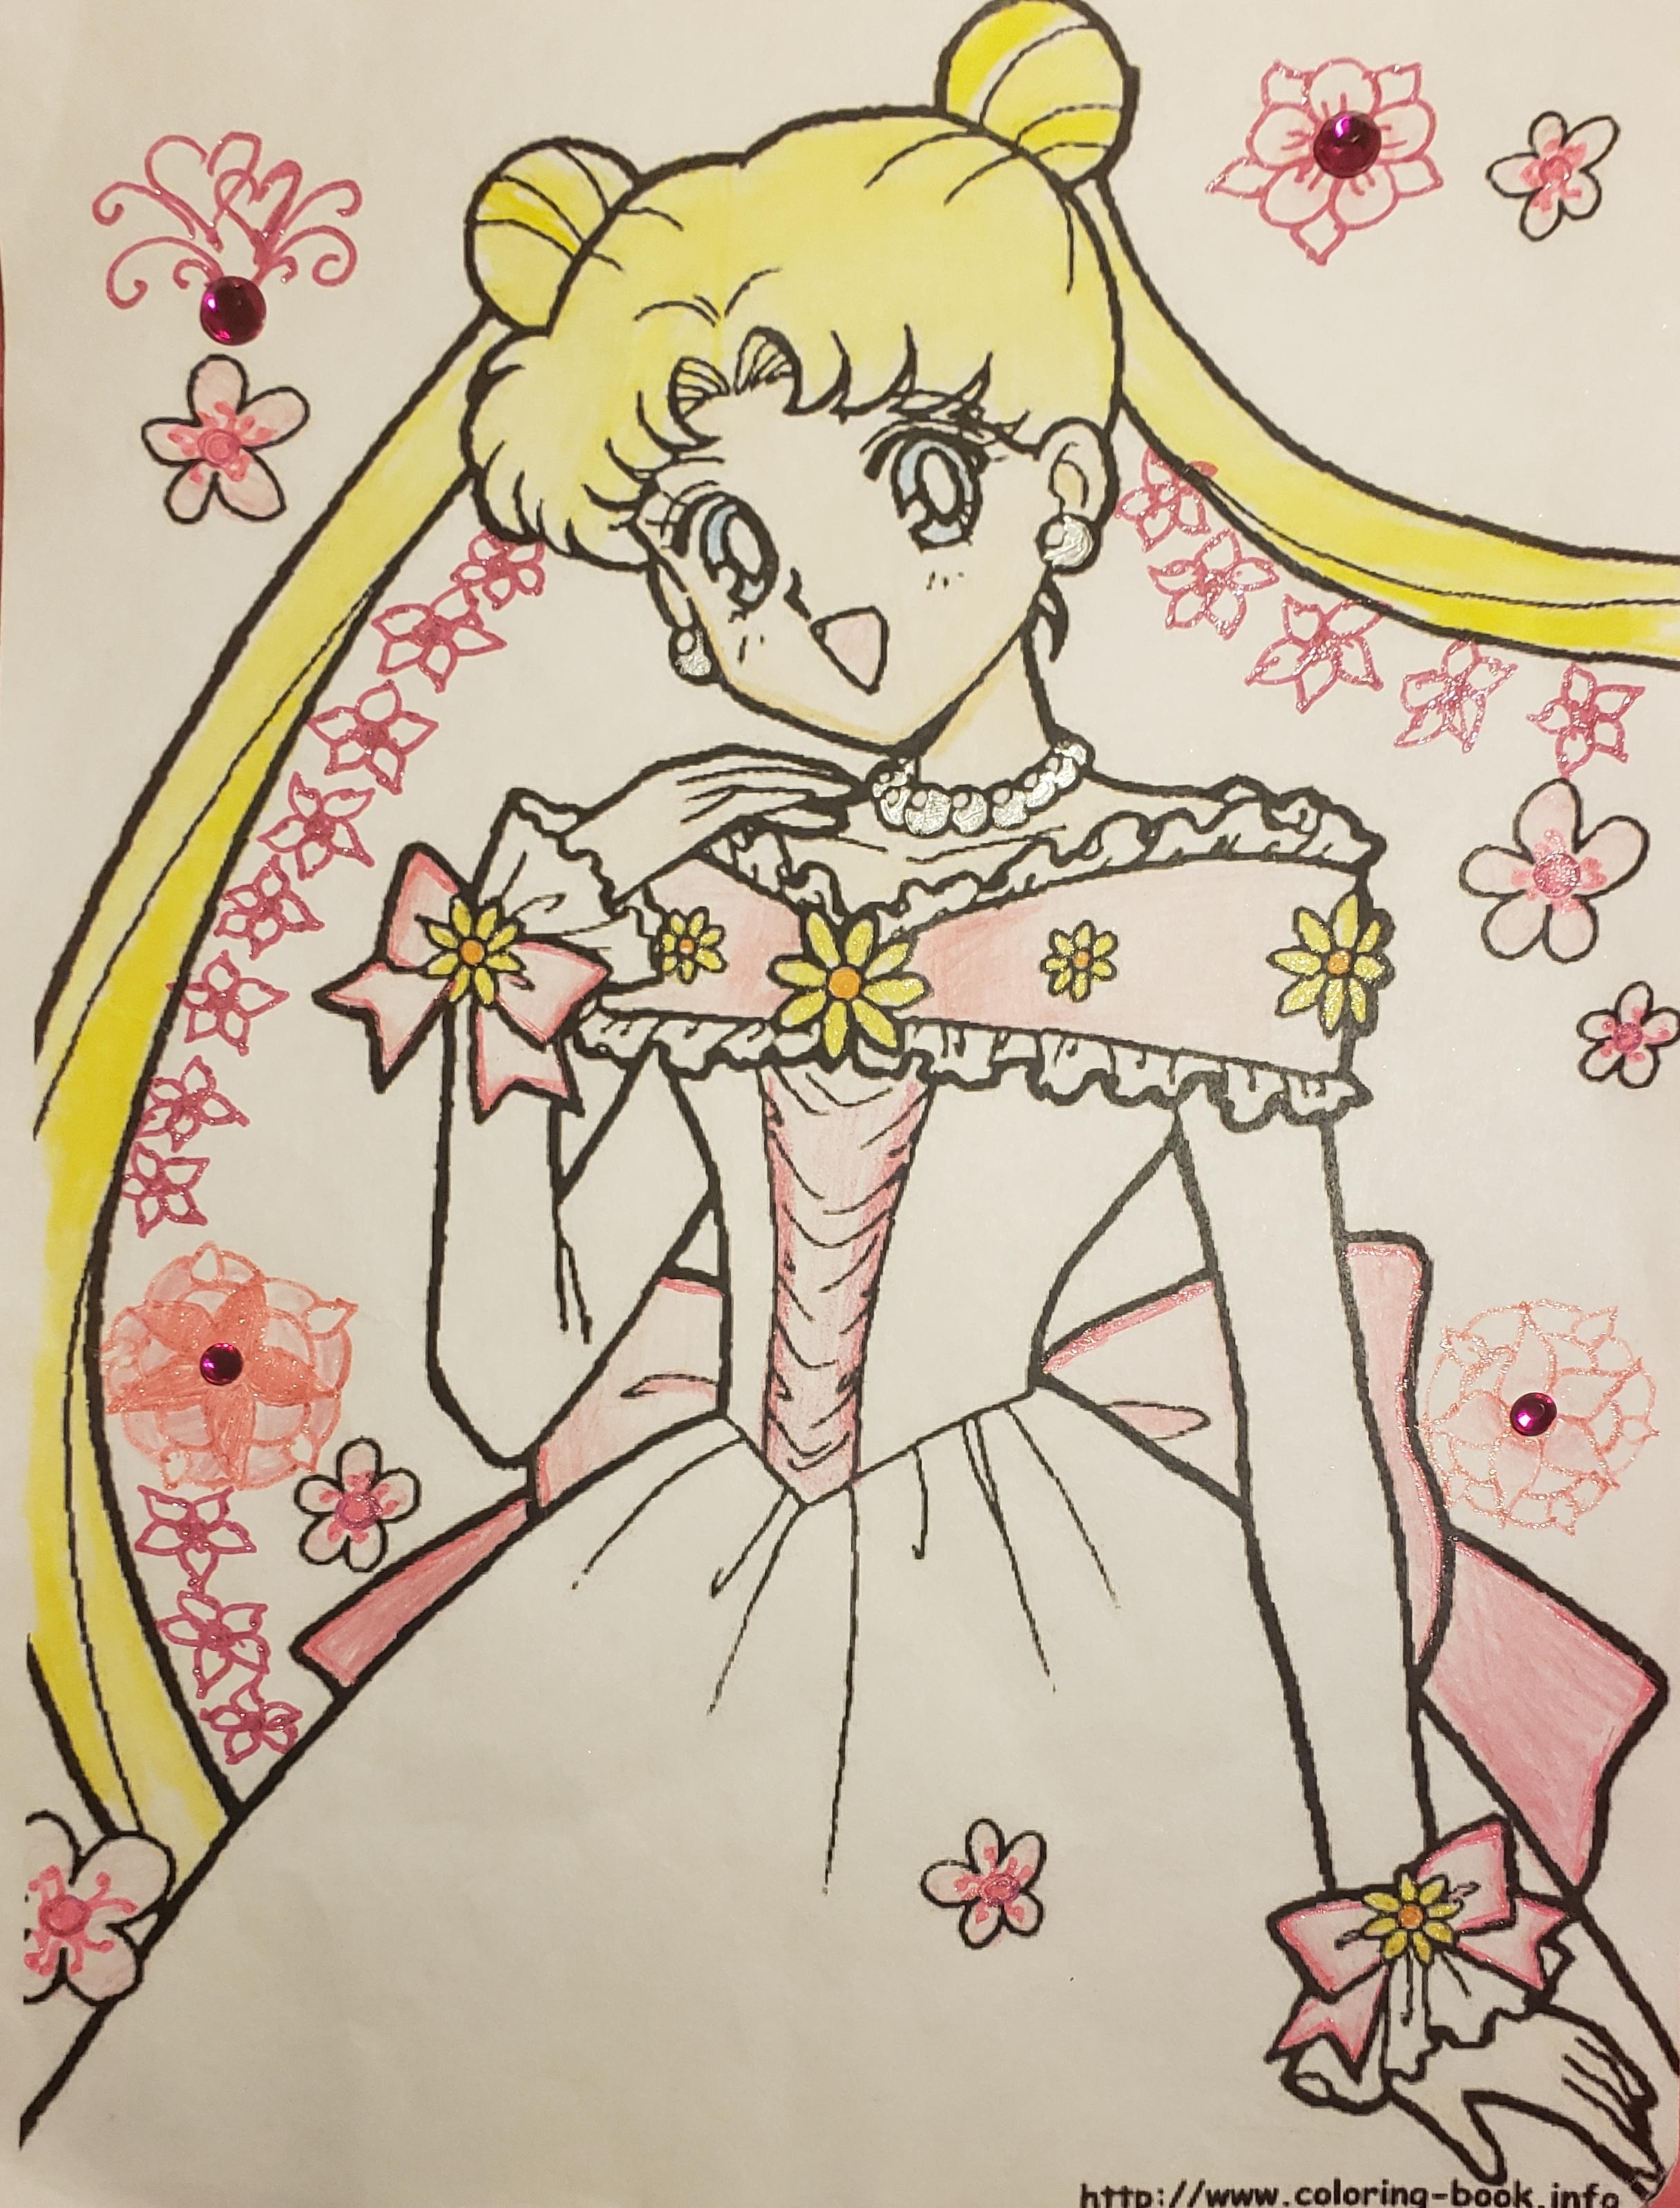 Sailor moon coloring pages with beauty background art by me the princess of quinceaãera nov to dec rsailormoon